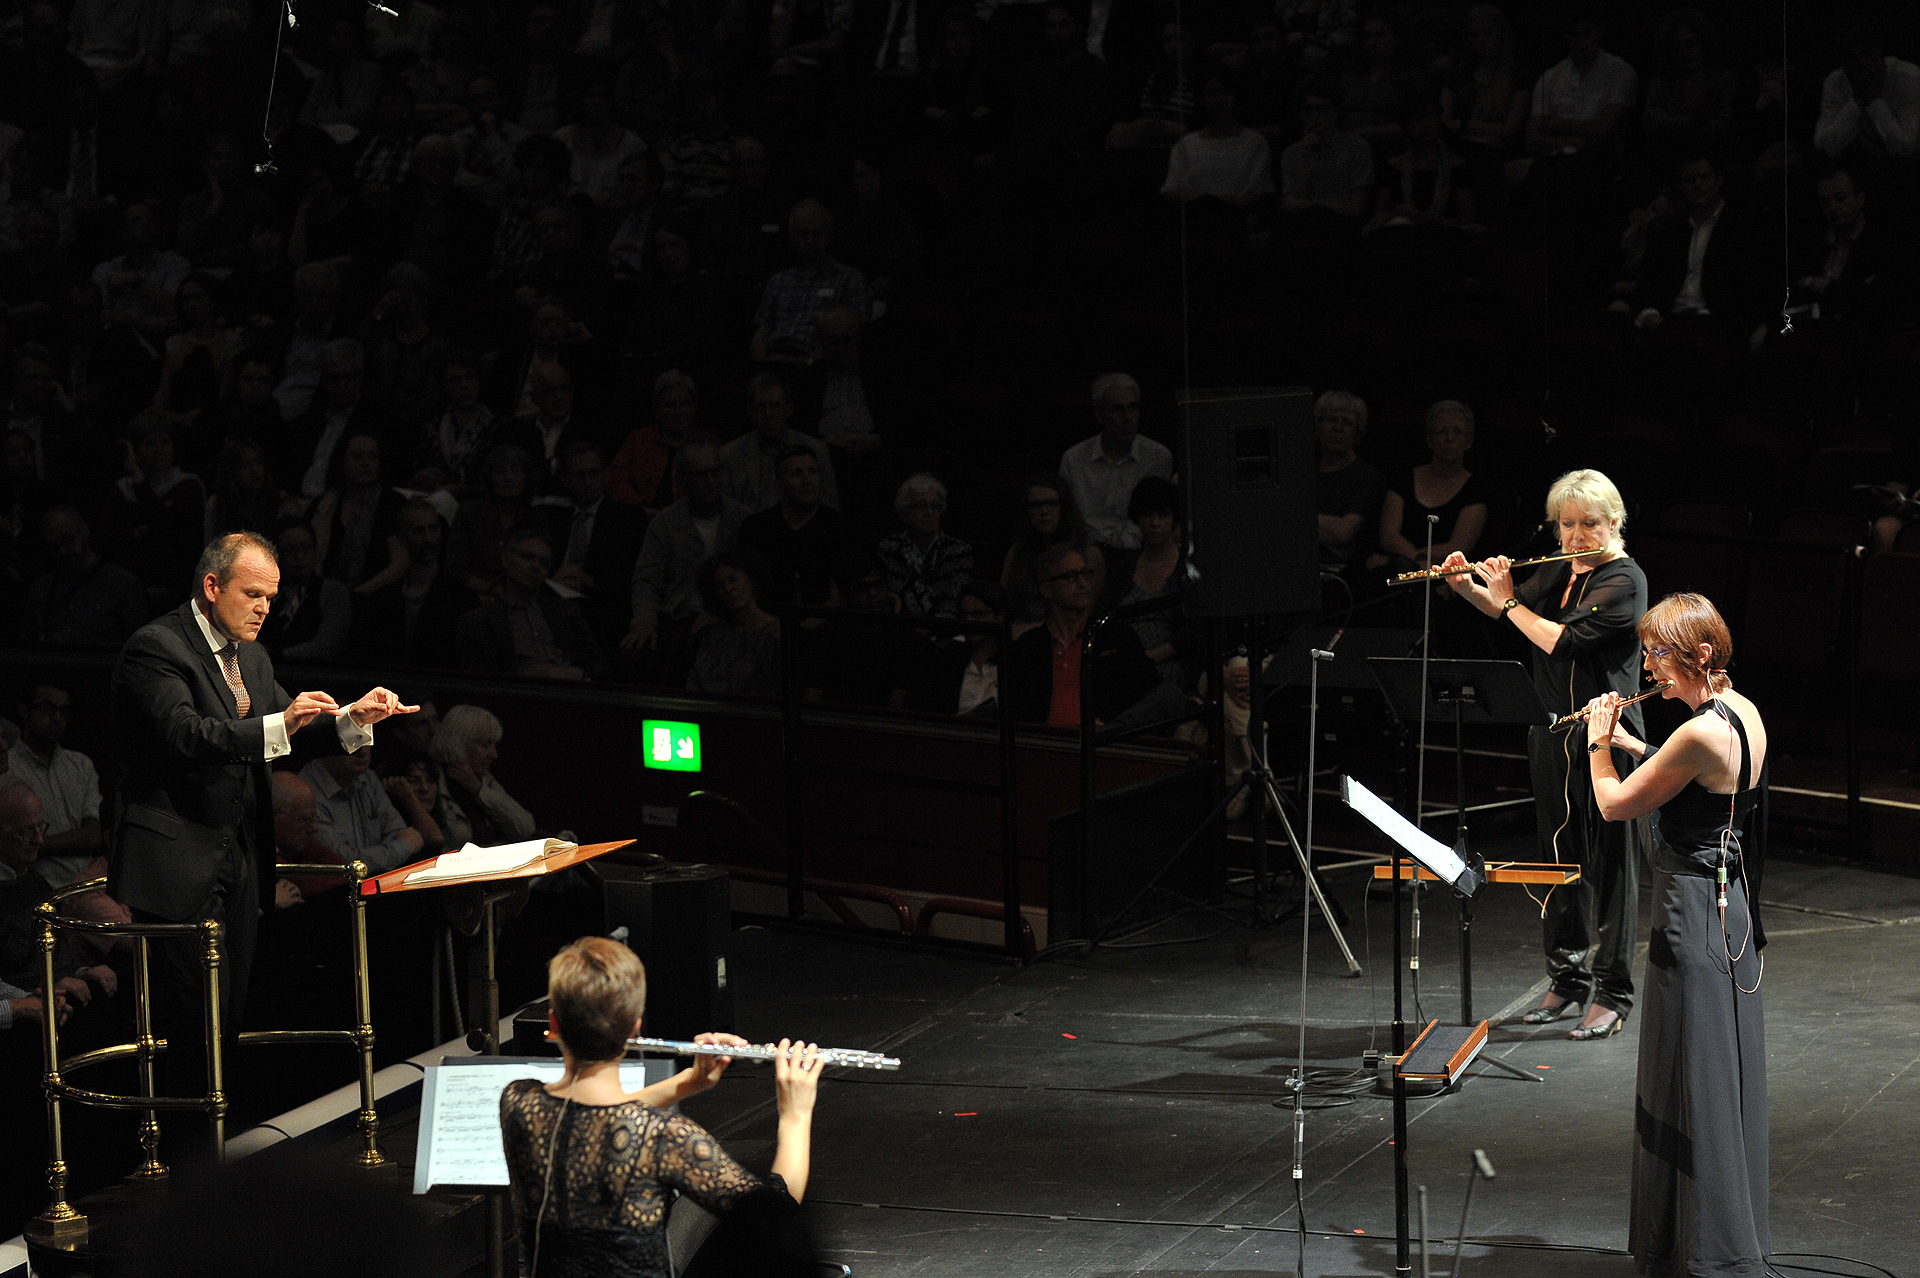 Sophie Cherrier, Dagmar Becker and Anne Romeis in a BBC Proms performance of ...explosante-fixe...